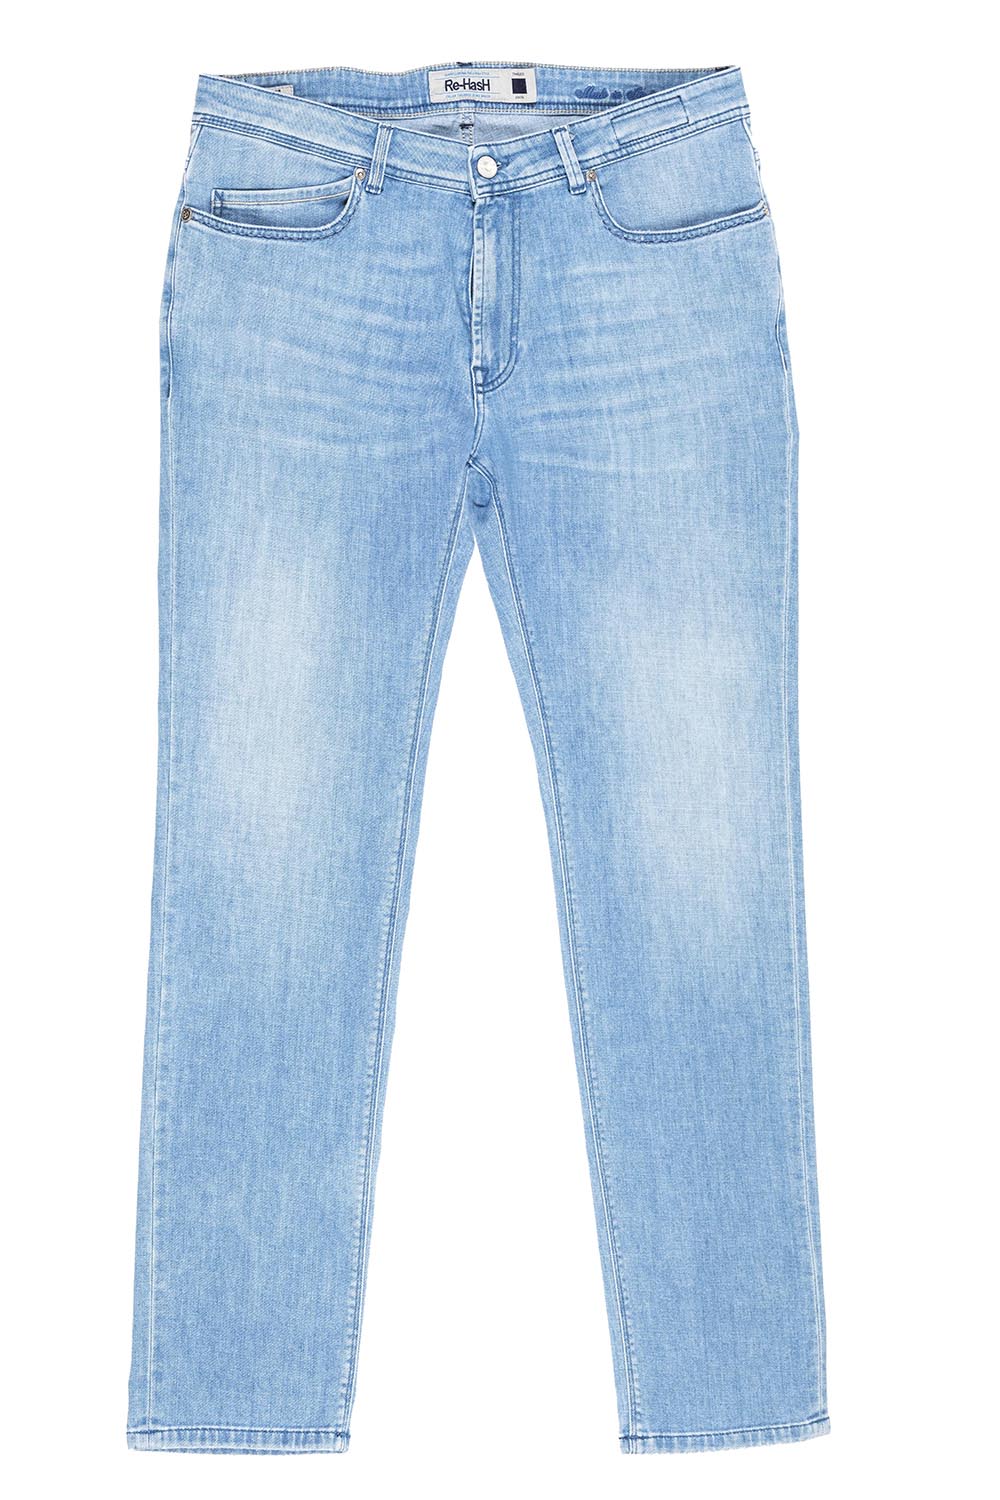 Re-Hash Washed Jeans - Bleu